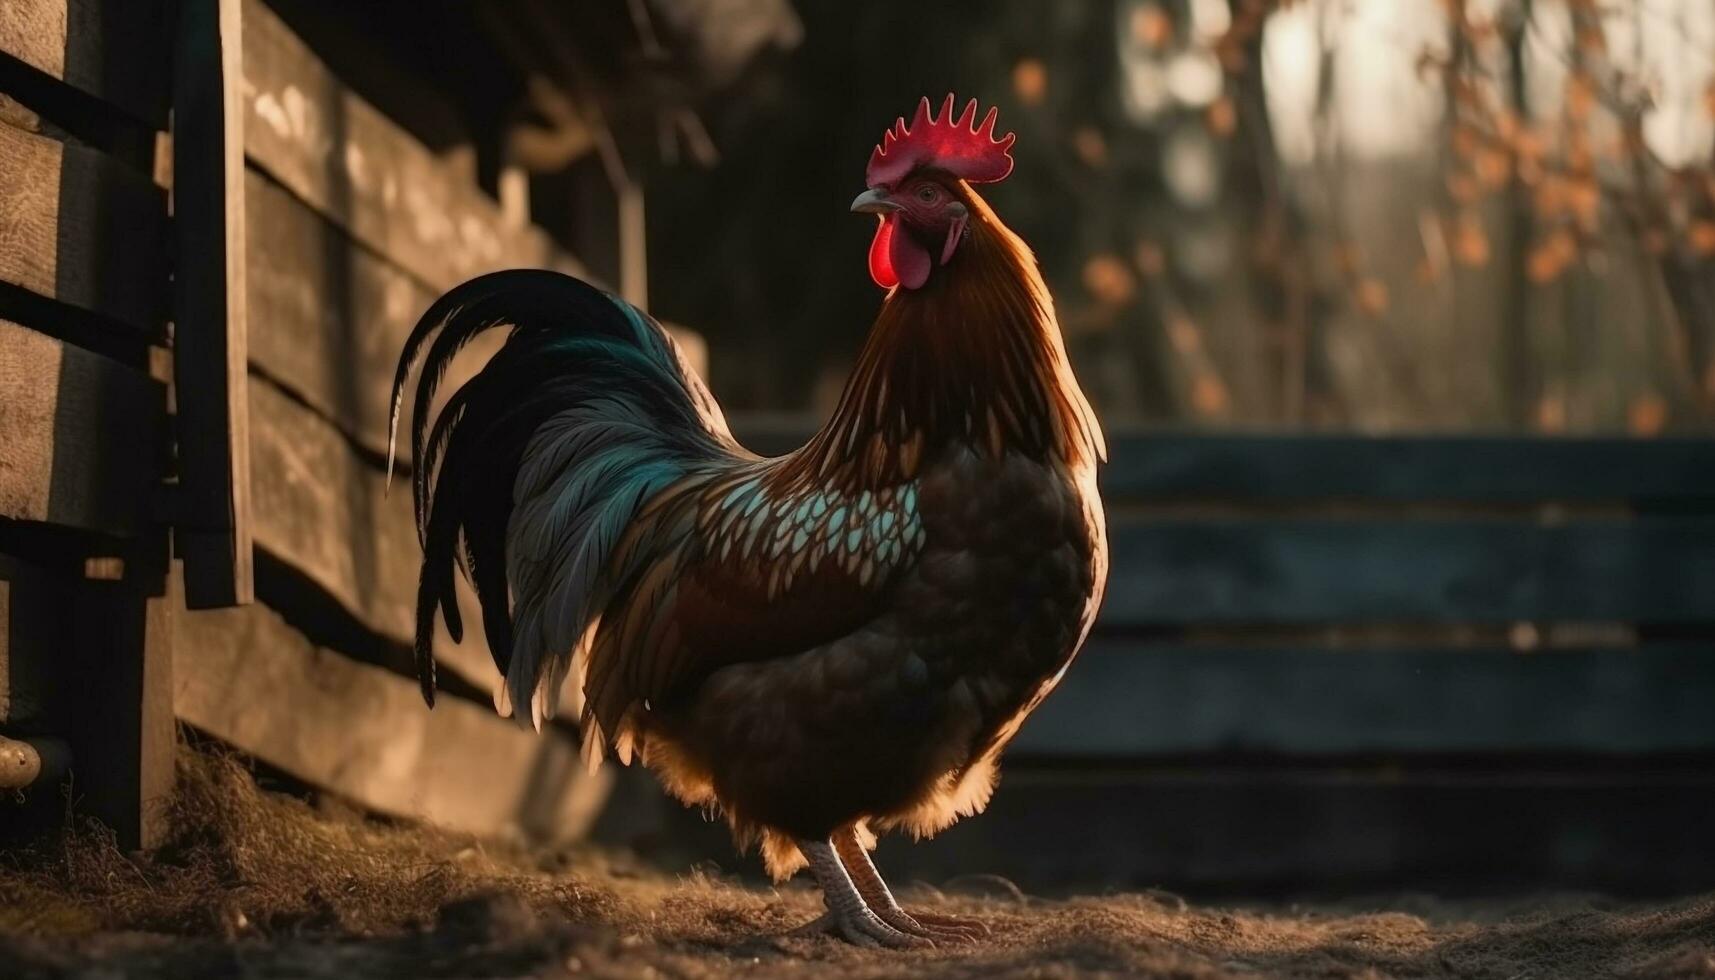 A proud rooster stands in a rural chicken coop, surrounded by nature generated by AI photo